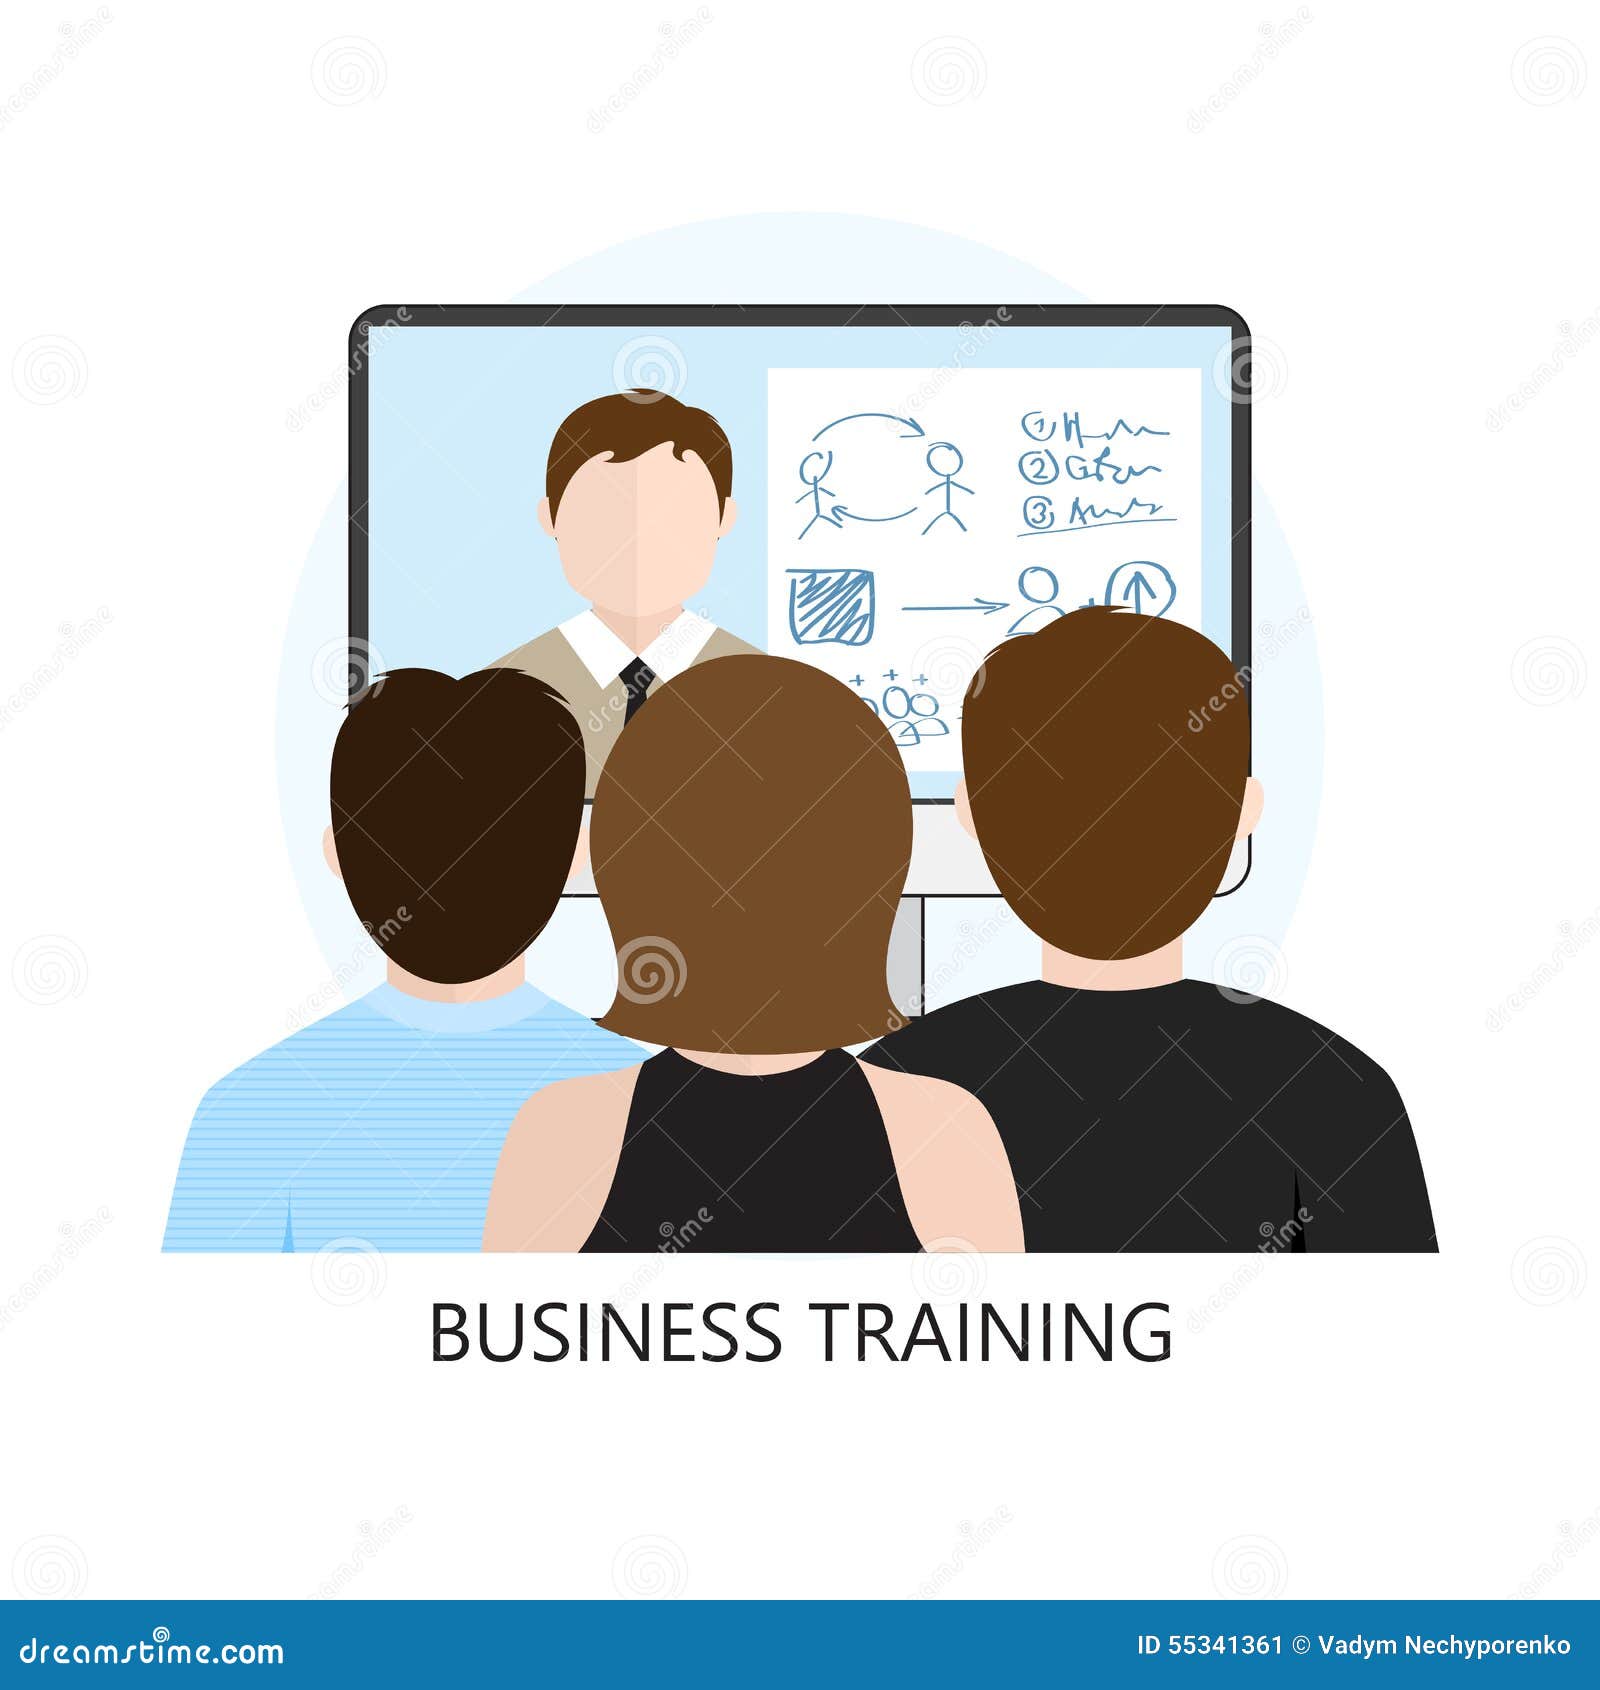 business training clipart - photo #31